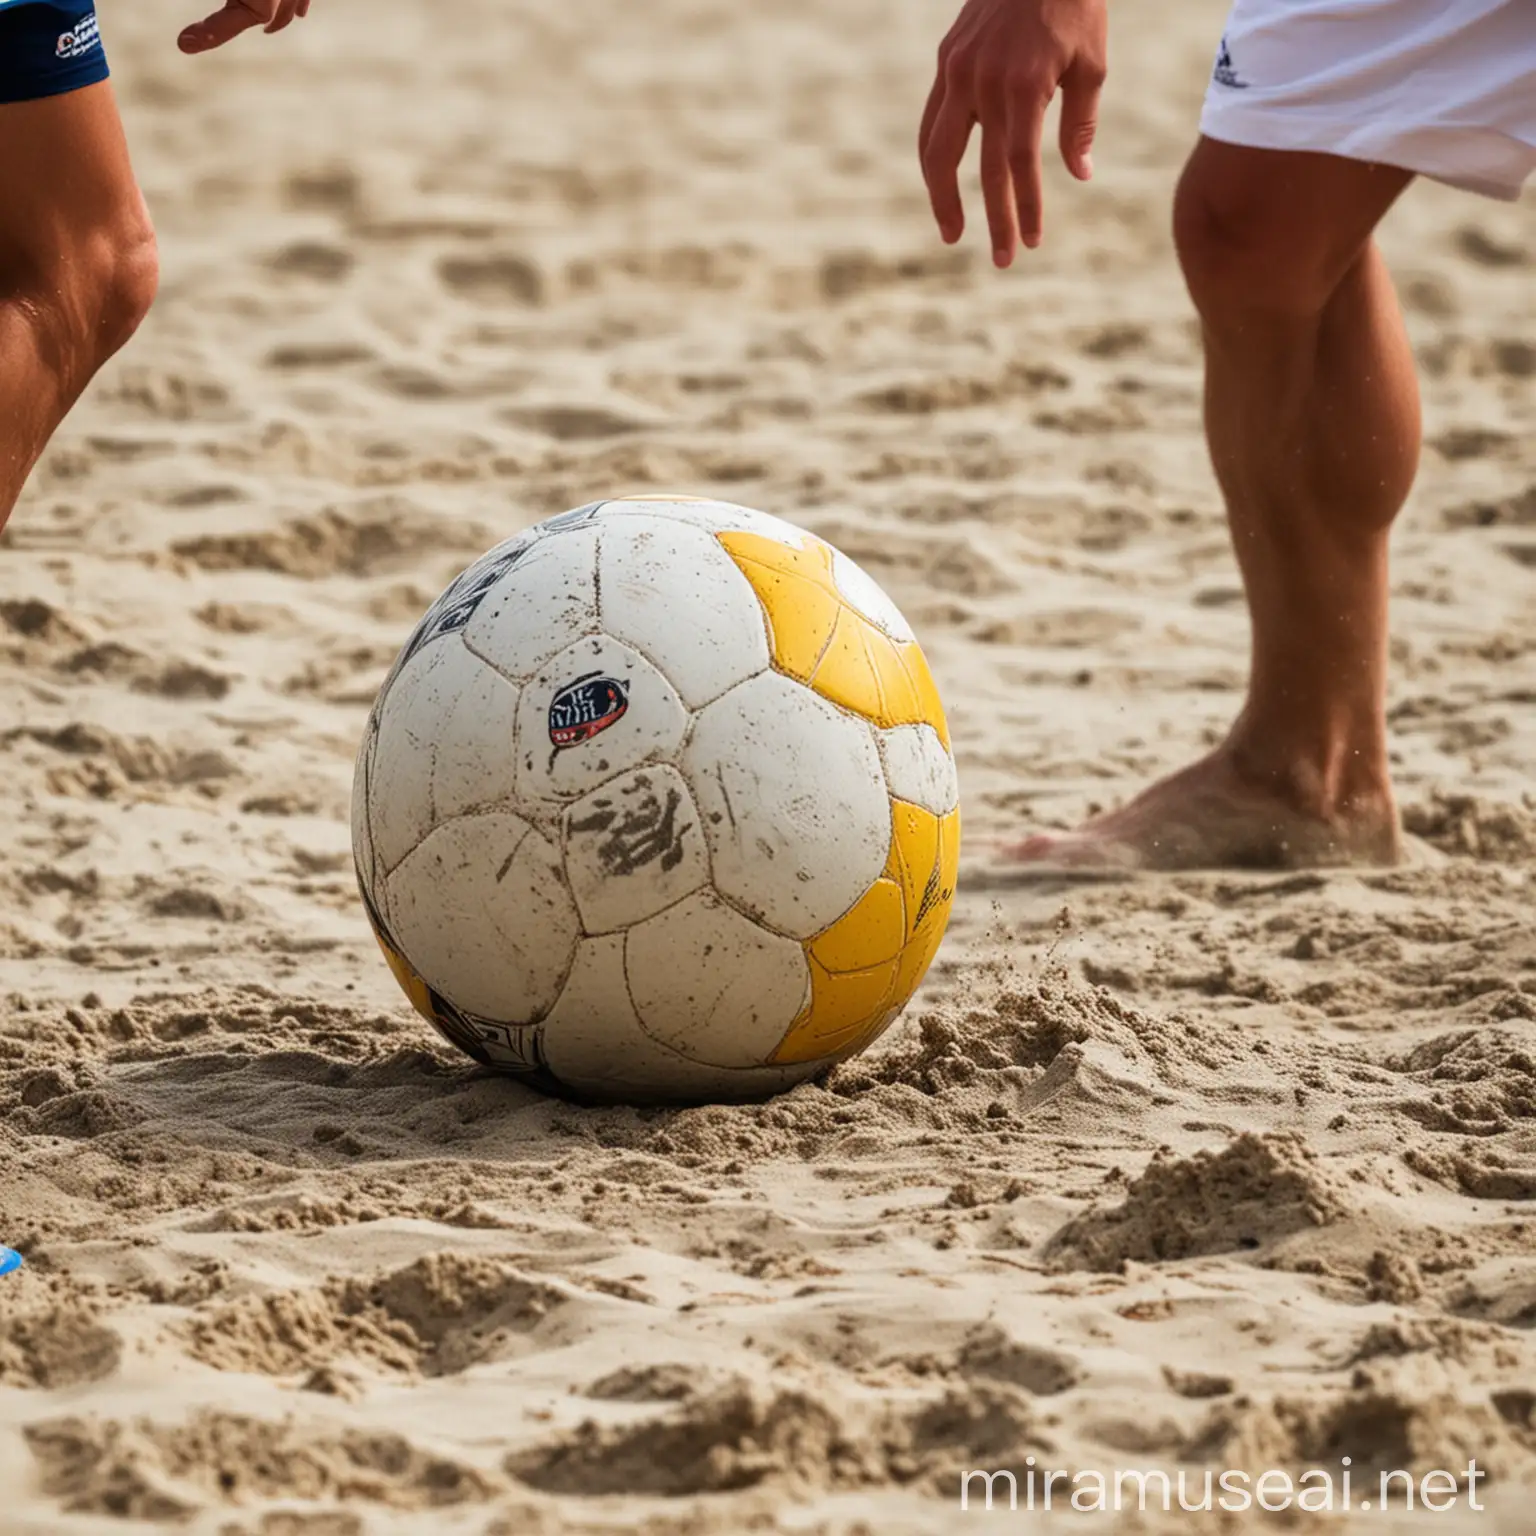 CloseUp Beach Soccer Players in Action